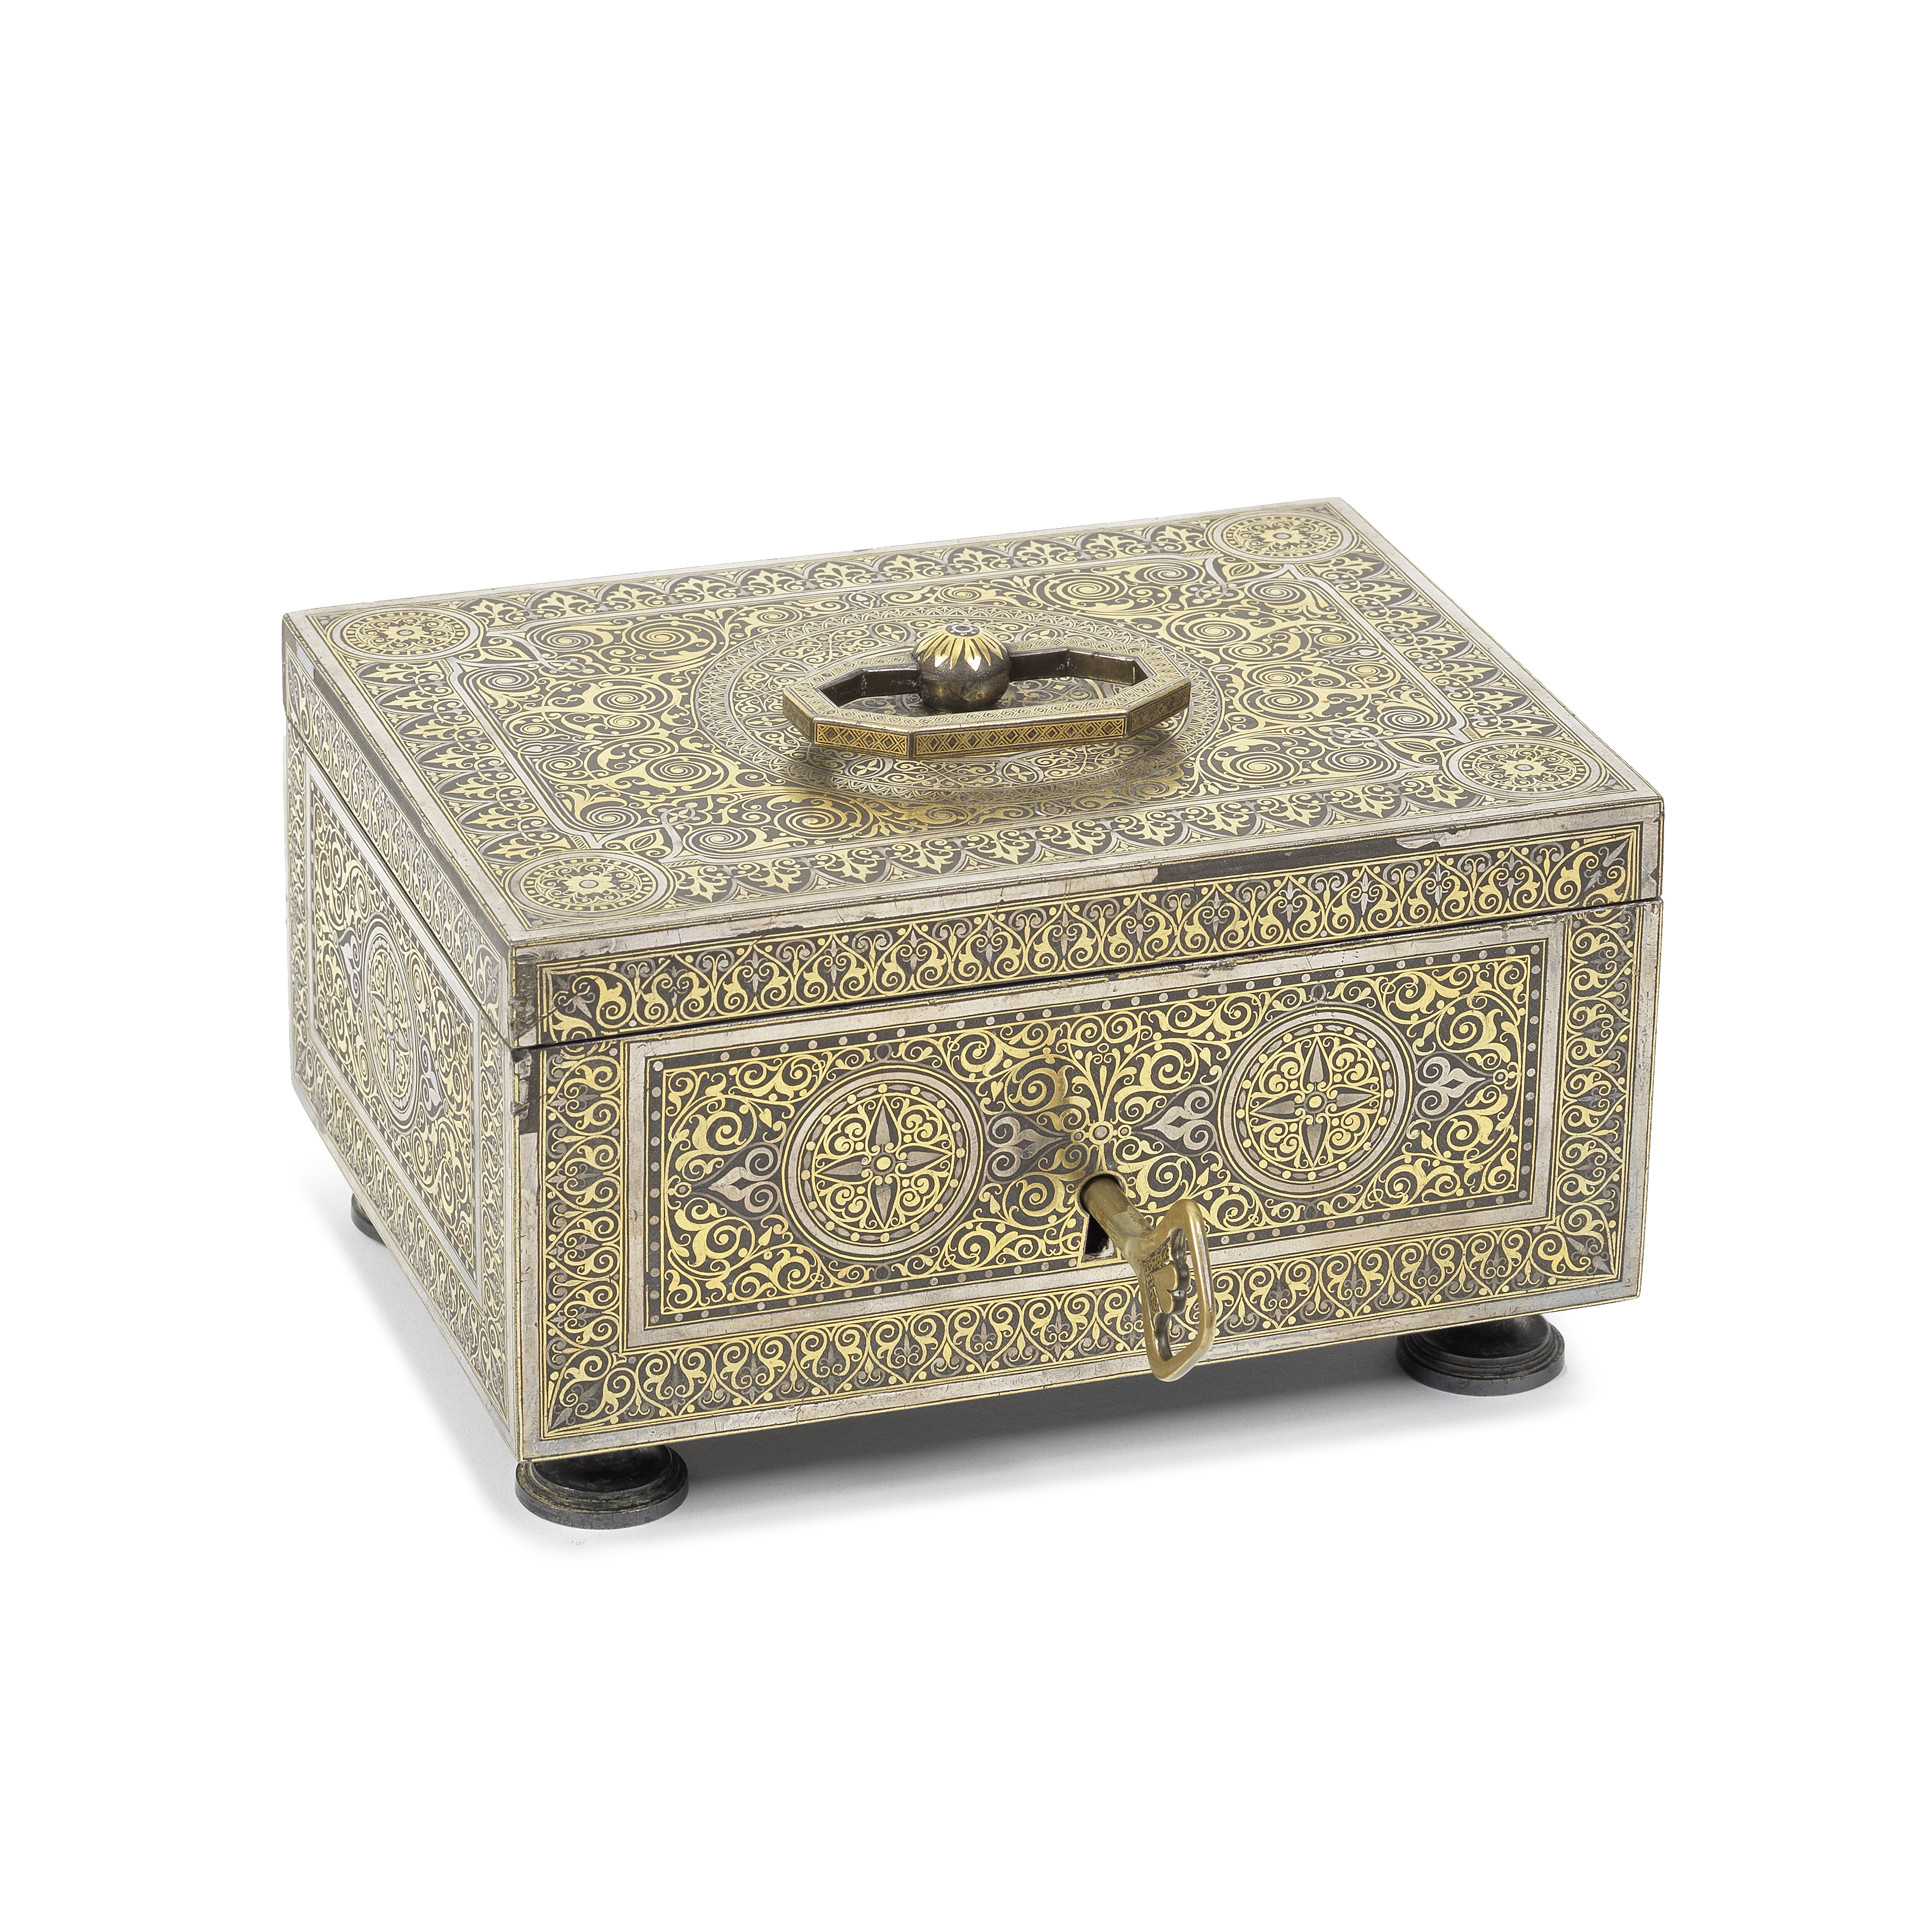 A late 19th century Toledo damascened casket In the manner of Placido Zuloaga (Spanish, 1834-1910)